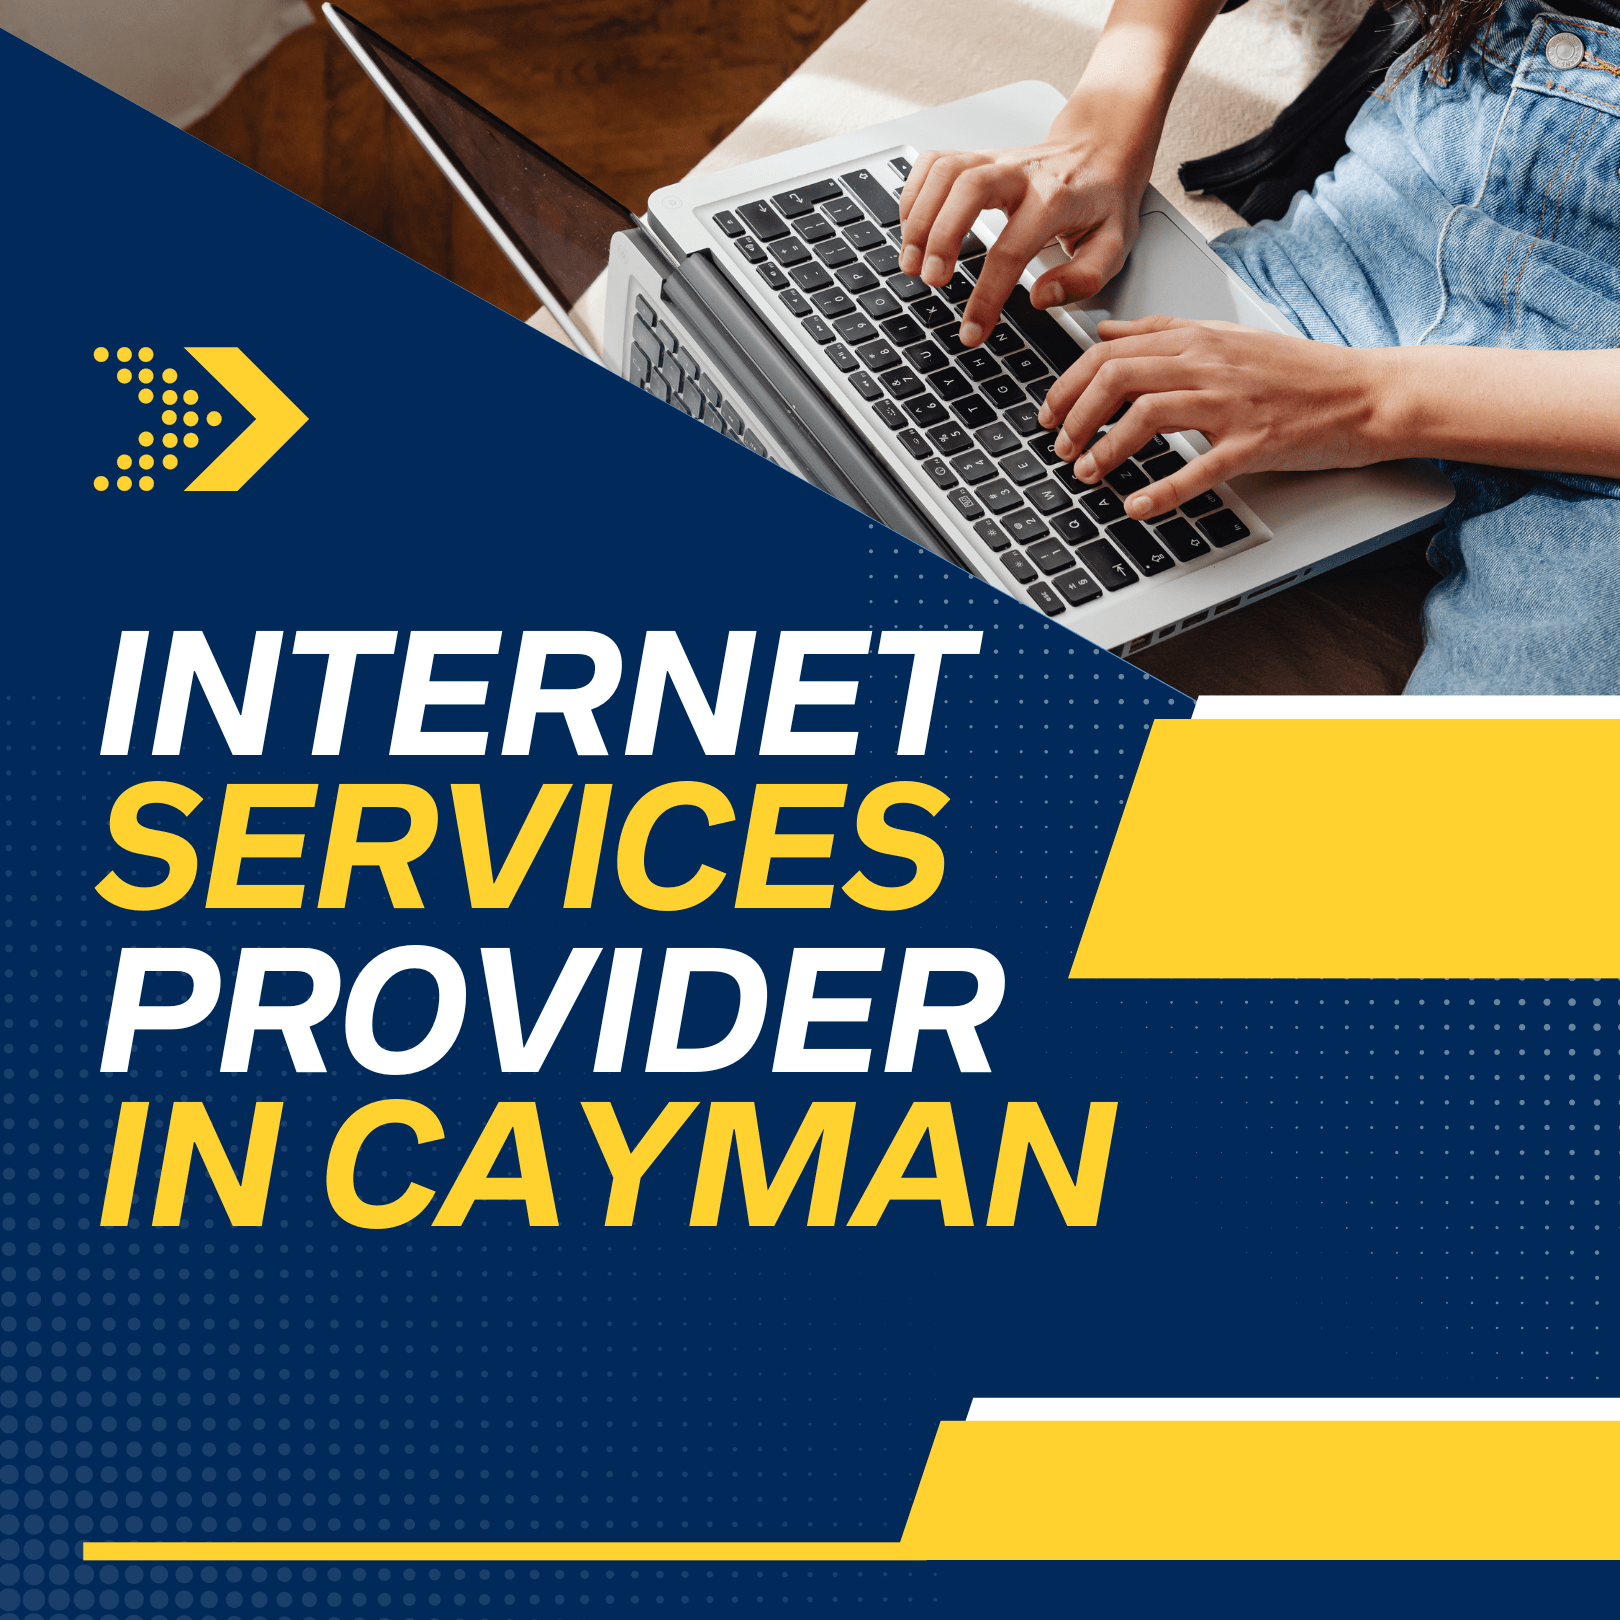 Internet Service Providers in Cayman